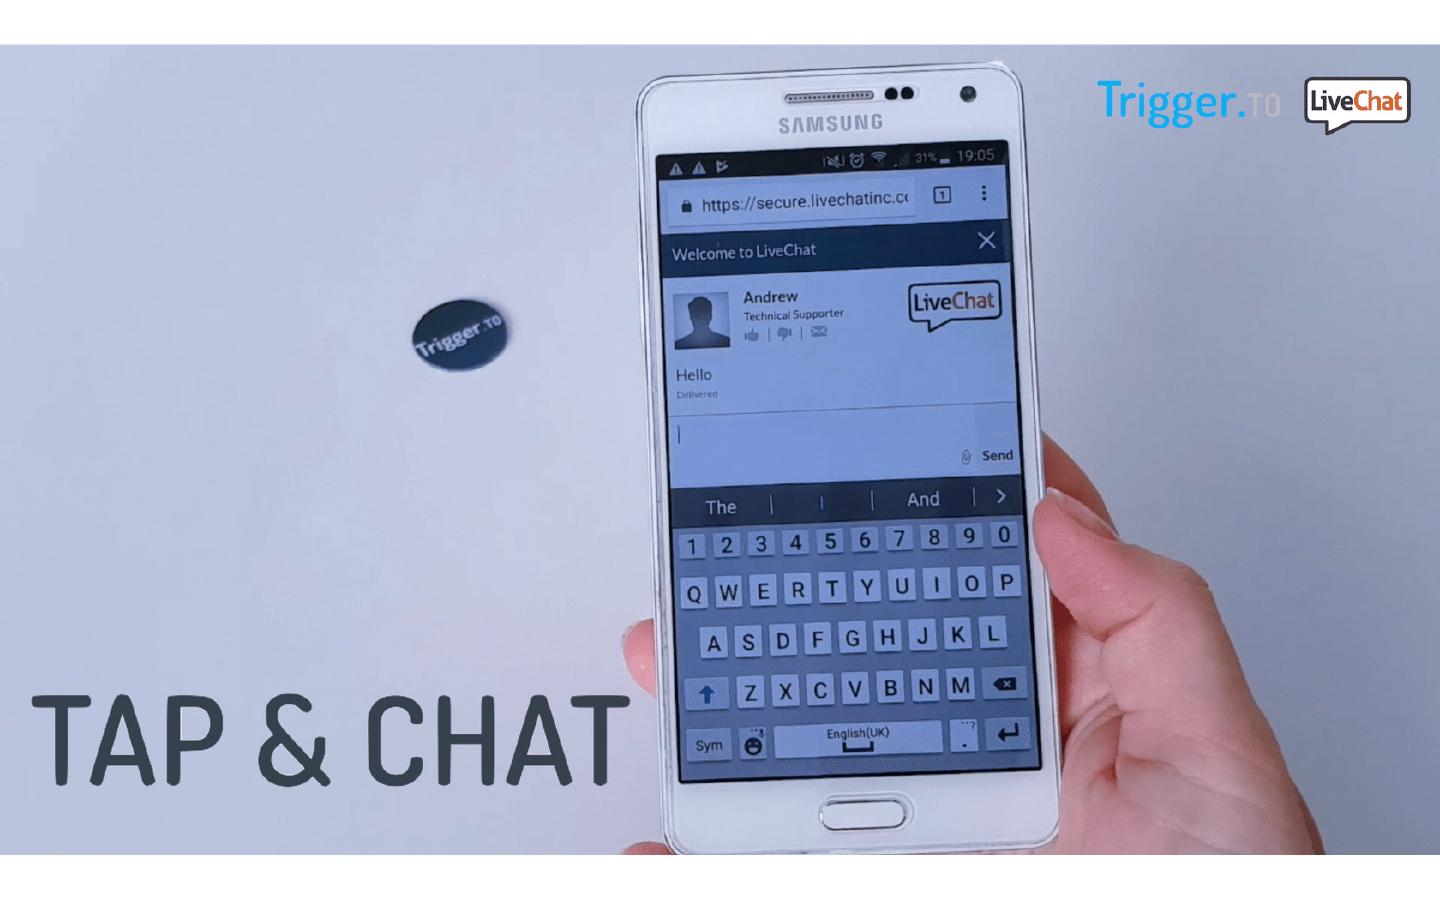 NFC Trigger.to LiveChat